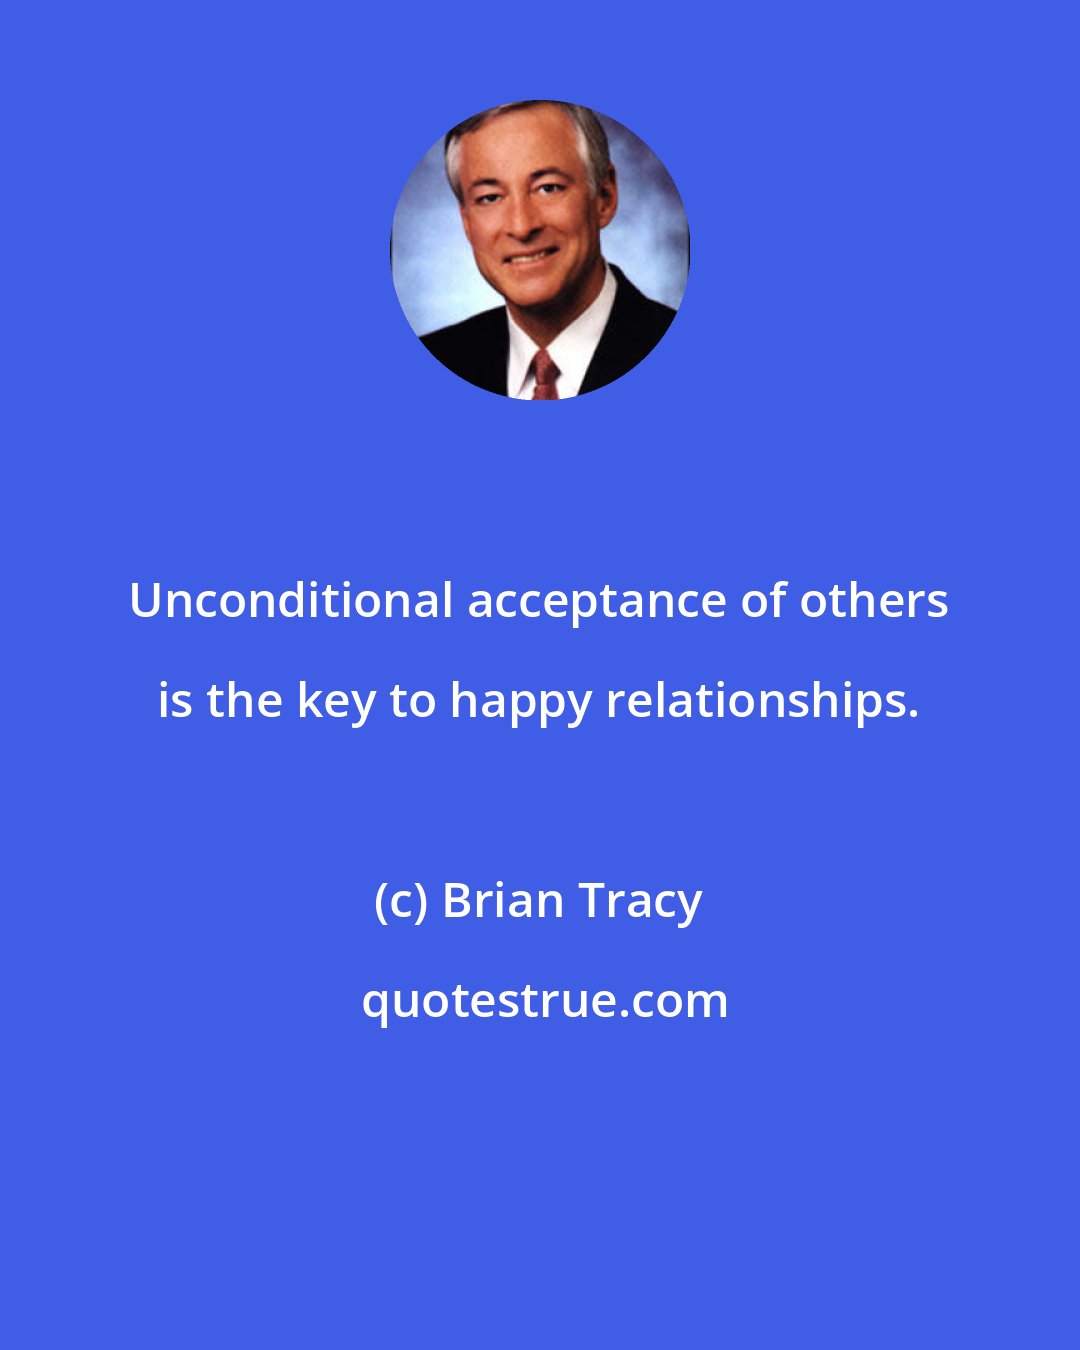 Brian Tracy: Unconditional acceptance of others is the key to happy relationships.